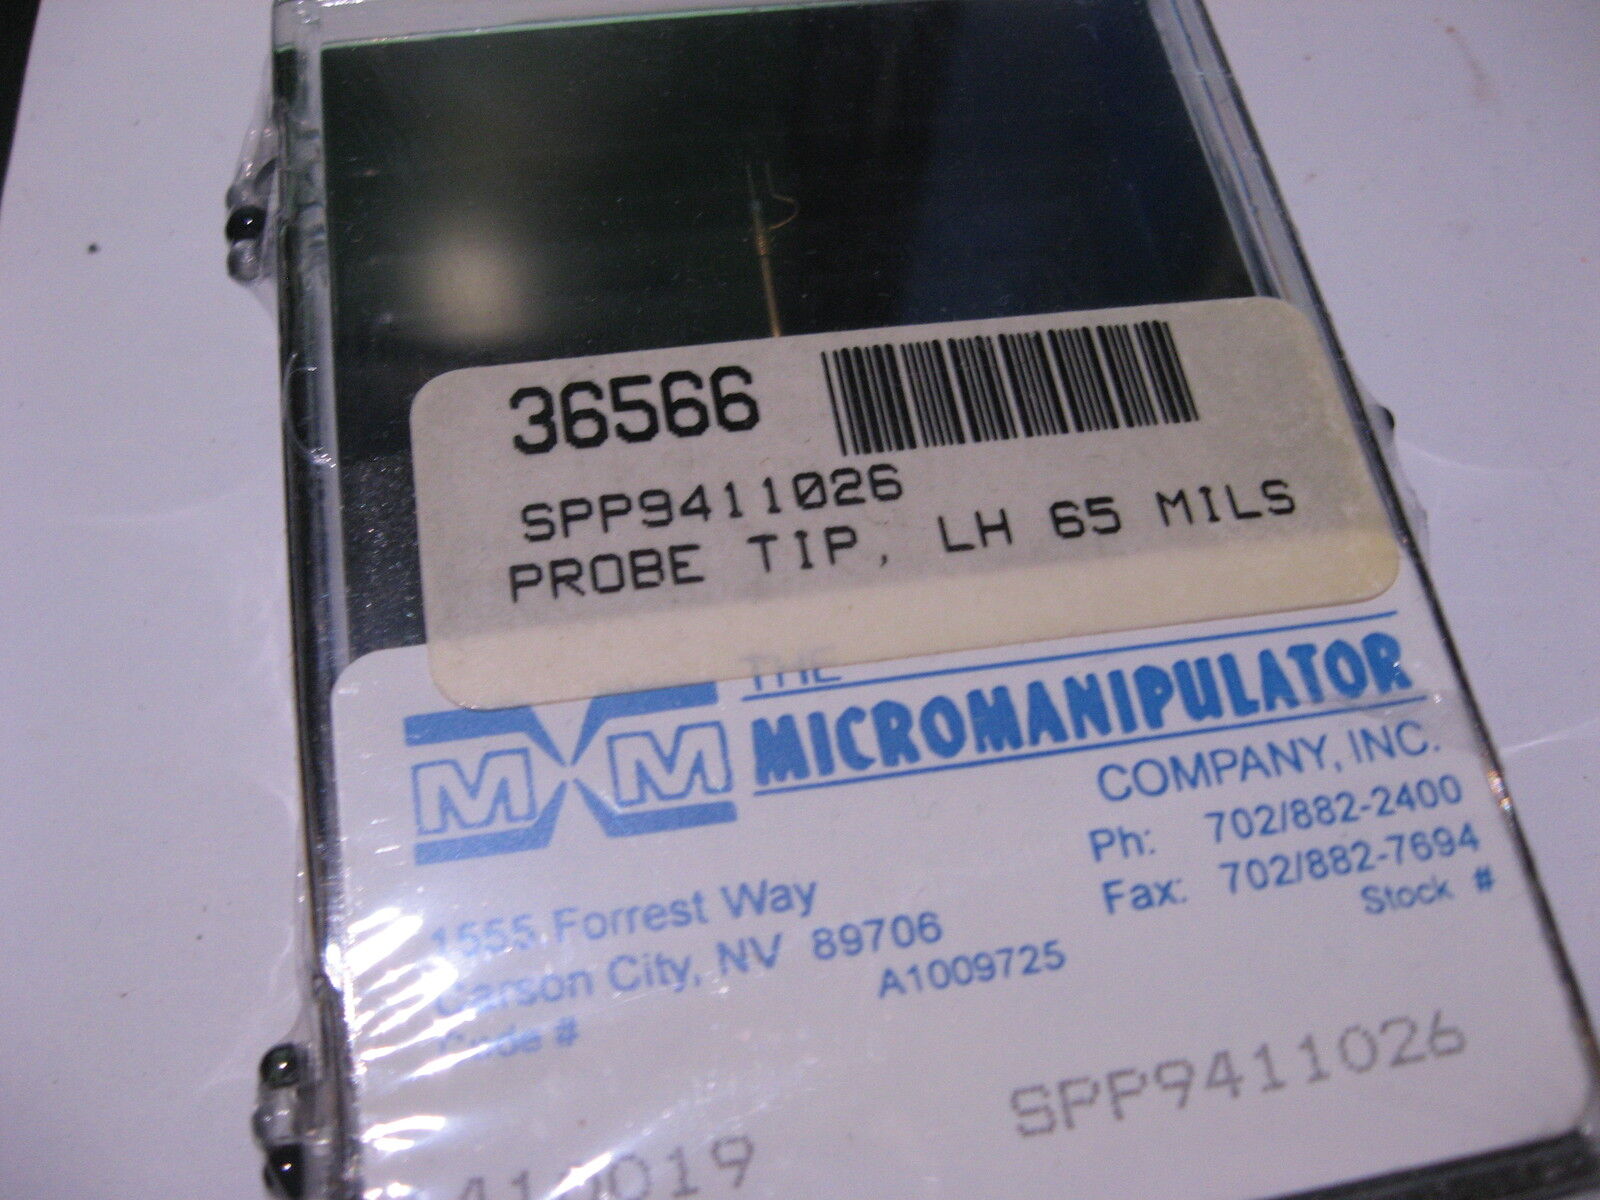 Qty Large special price !! 1 Micromanipulator Co. Probe Tip Mils SPP9411026 LH 65 NEW - List price